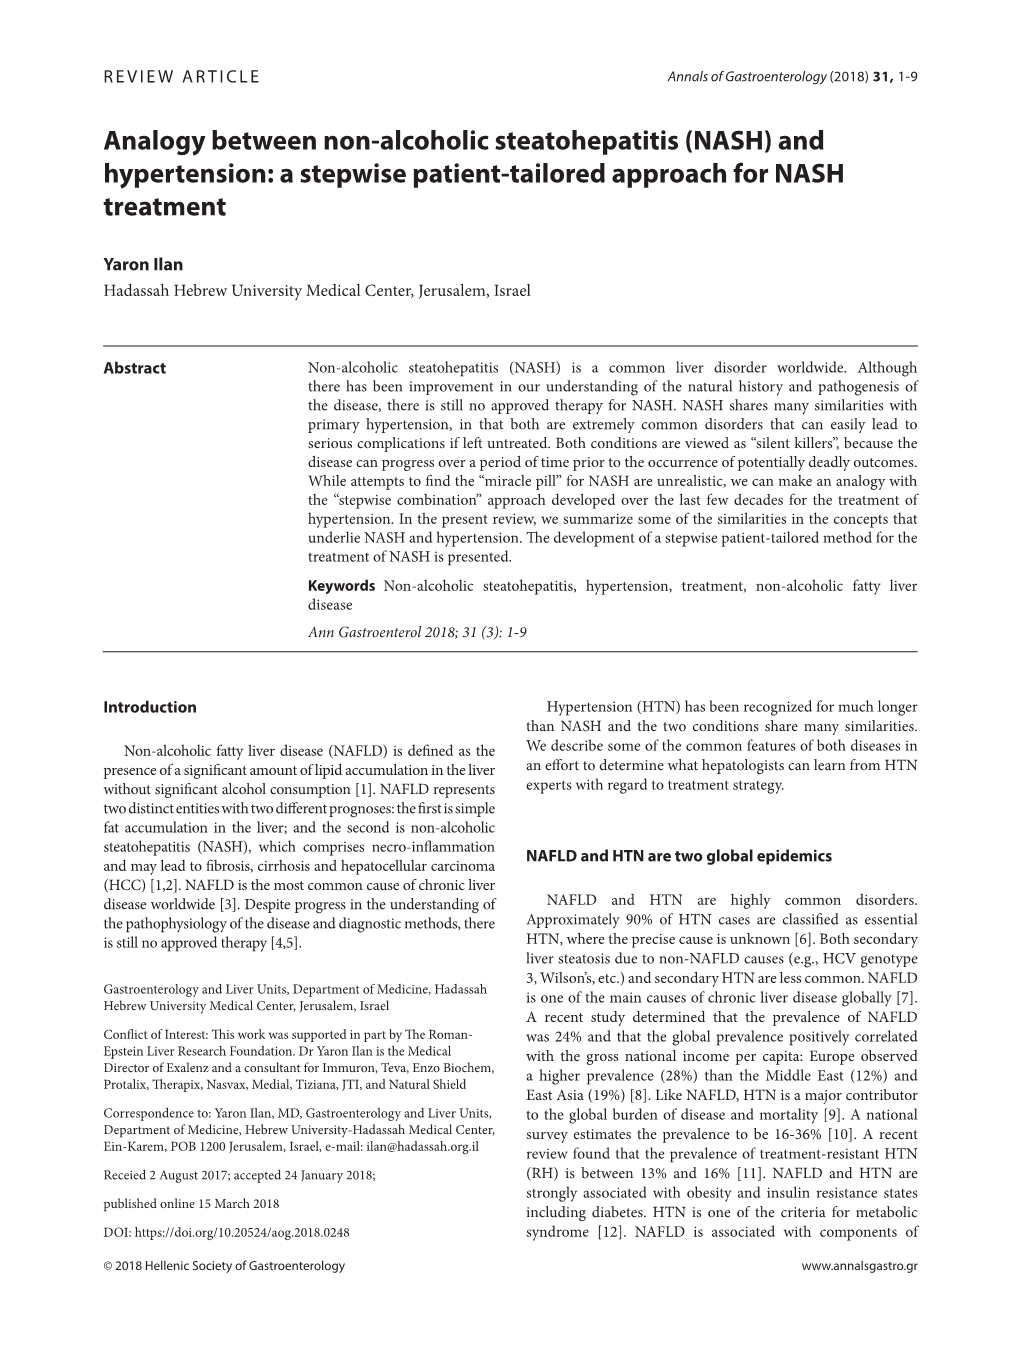 Analogy Between Non-Alcoholic Steatohepatitis (NASH) and Hypertension: a Stepwise Patient-Tailored Approach for NASH Treatment